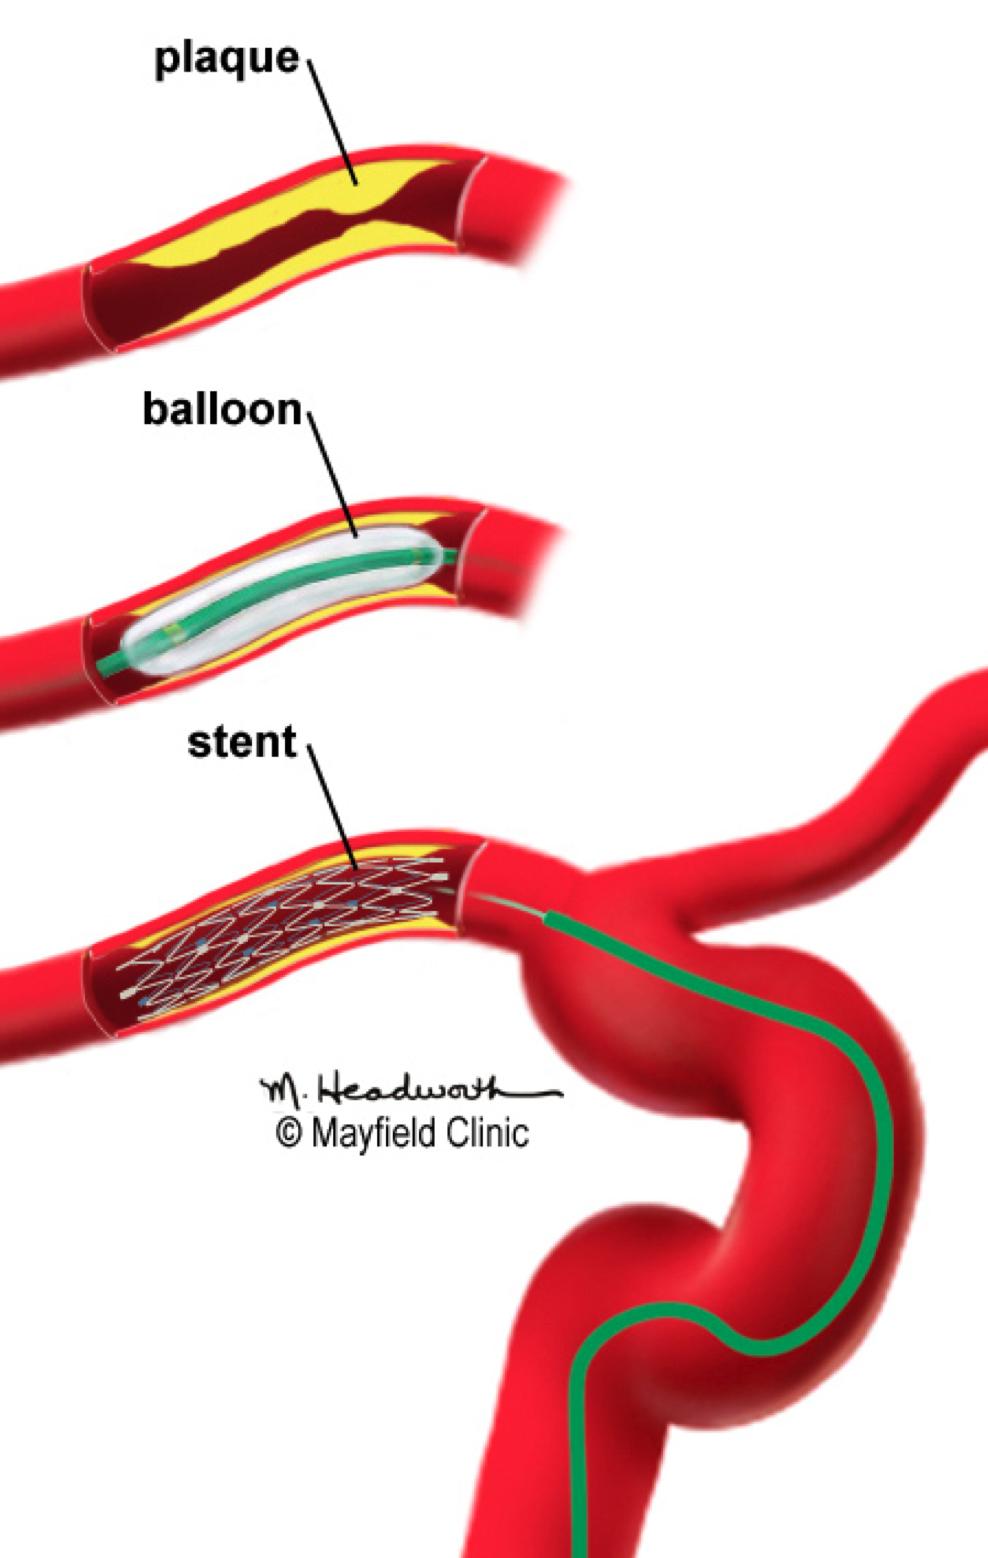 8 9 Angioplasty Angioplasty is used to open blood vessels narrowed or blocked by plaque build-up in atherosclerosis. A neuro-interventionalist performs it during an angiogram.